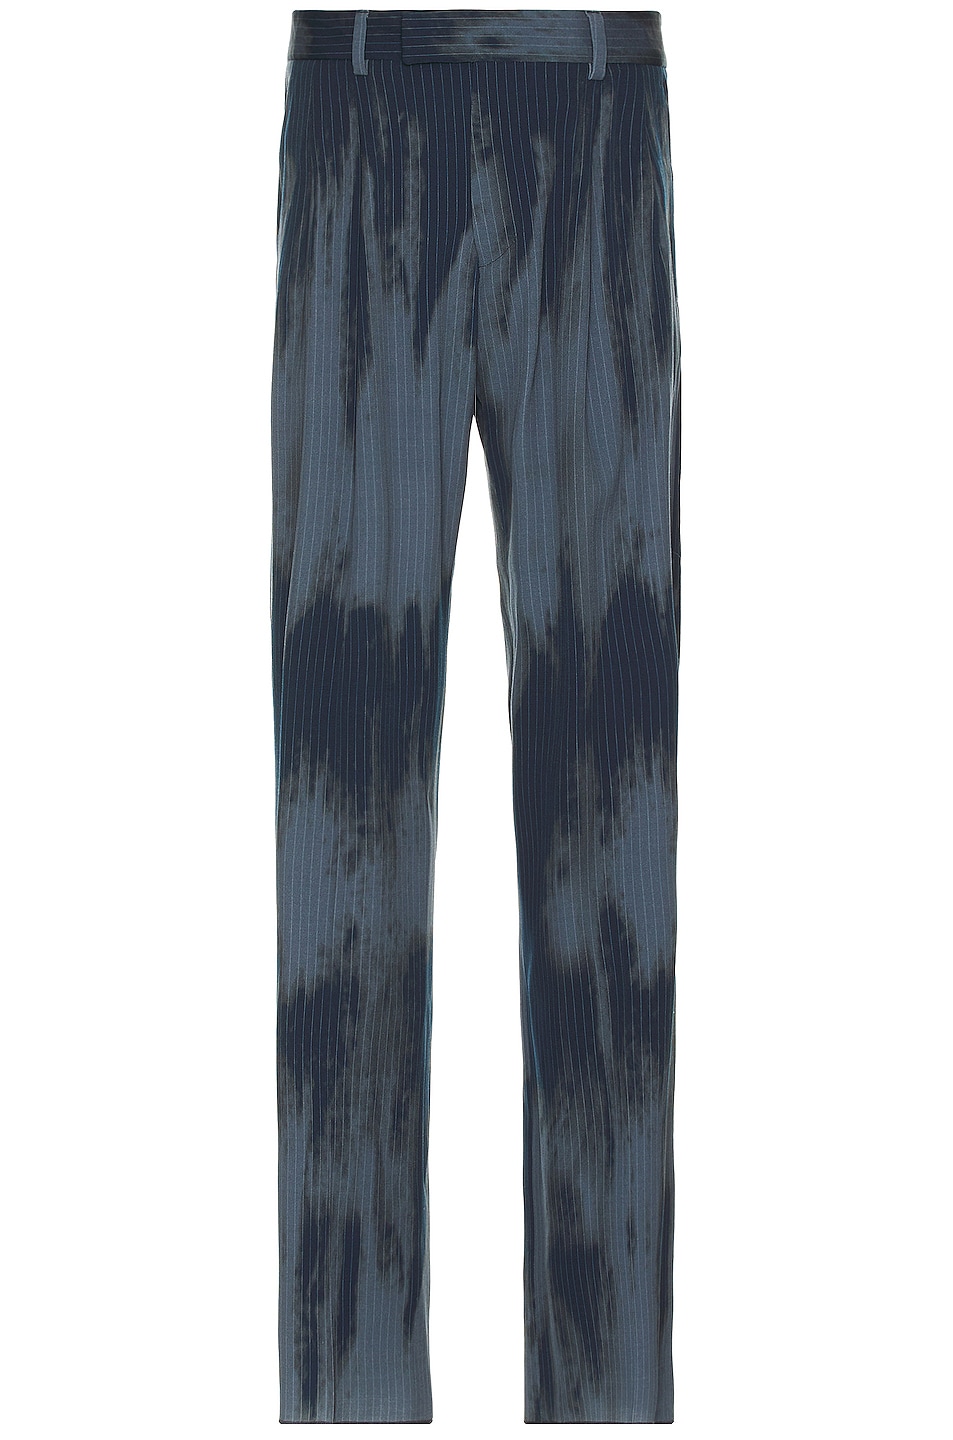 Amiri Pinstripe Double Pleated Trousers in Navy | FWRD